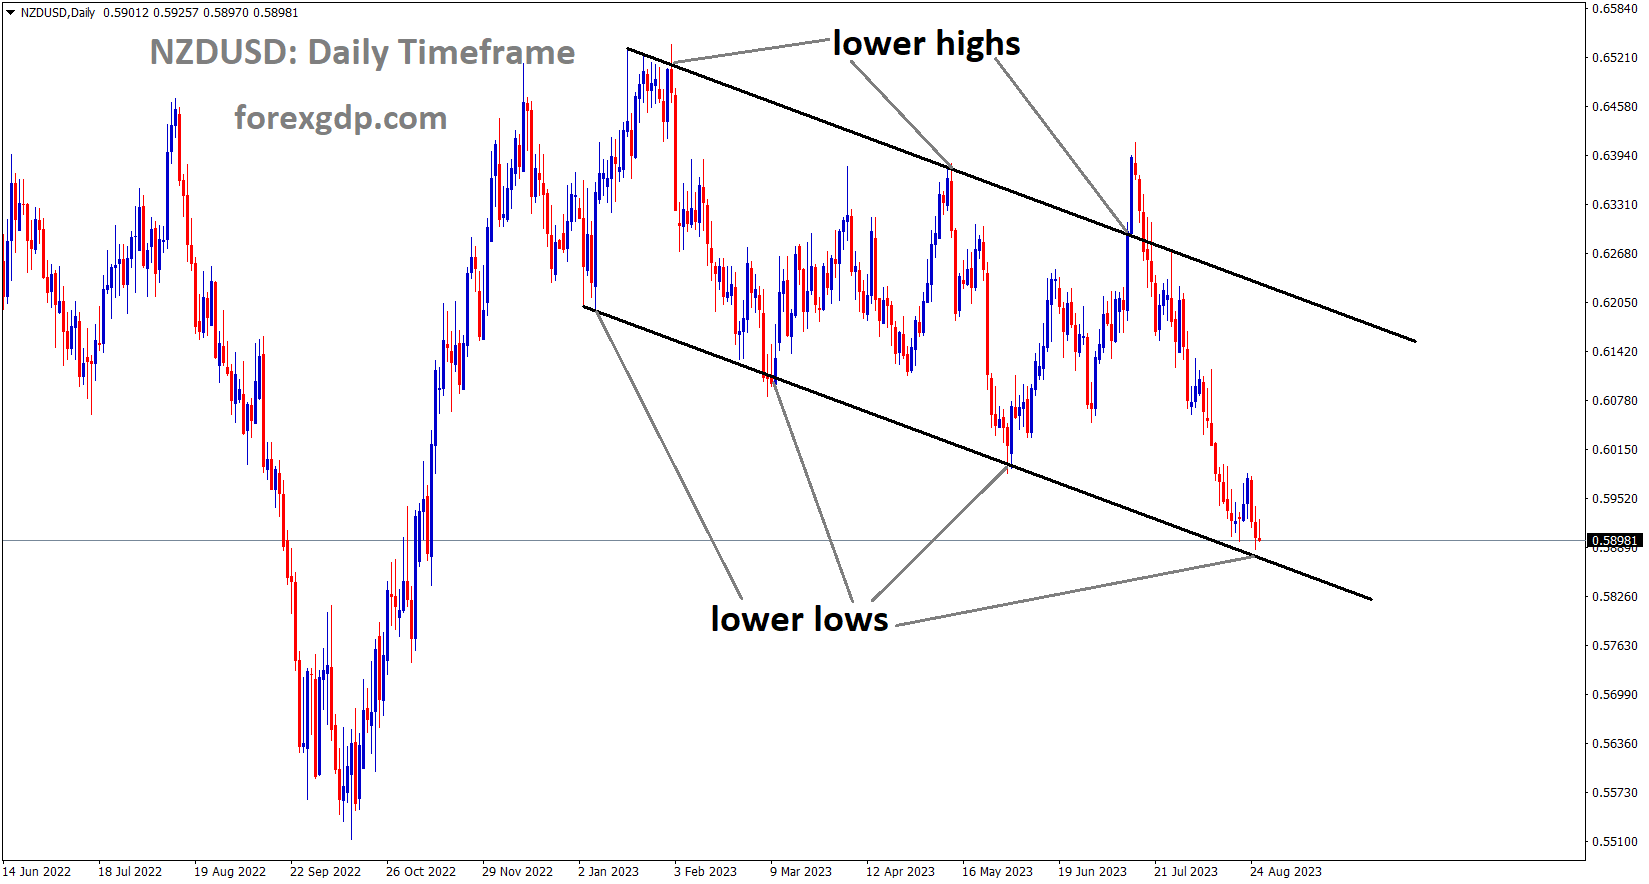 NZDUSD is moving in the Descending channel and the market has reached the lower low area of the channel